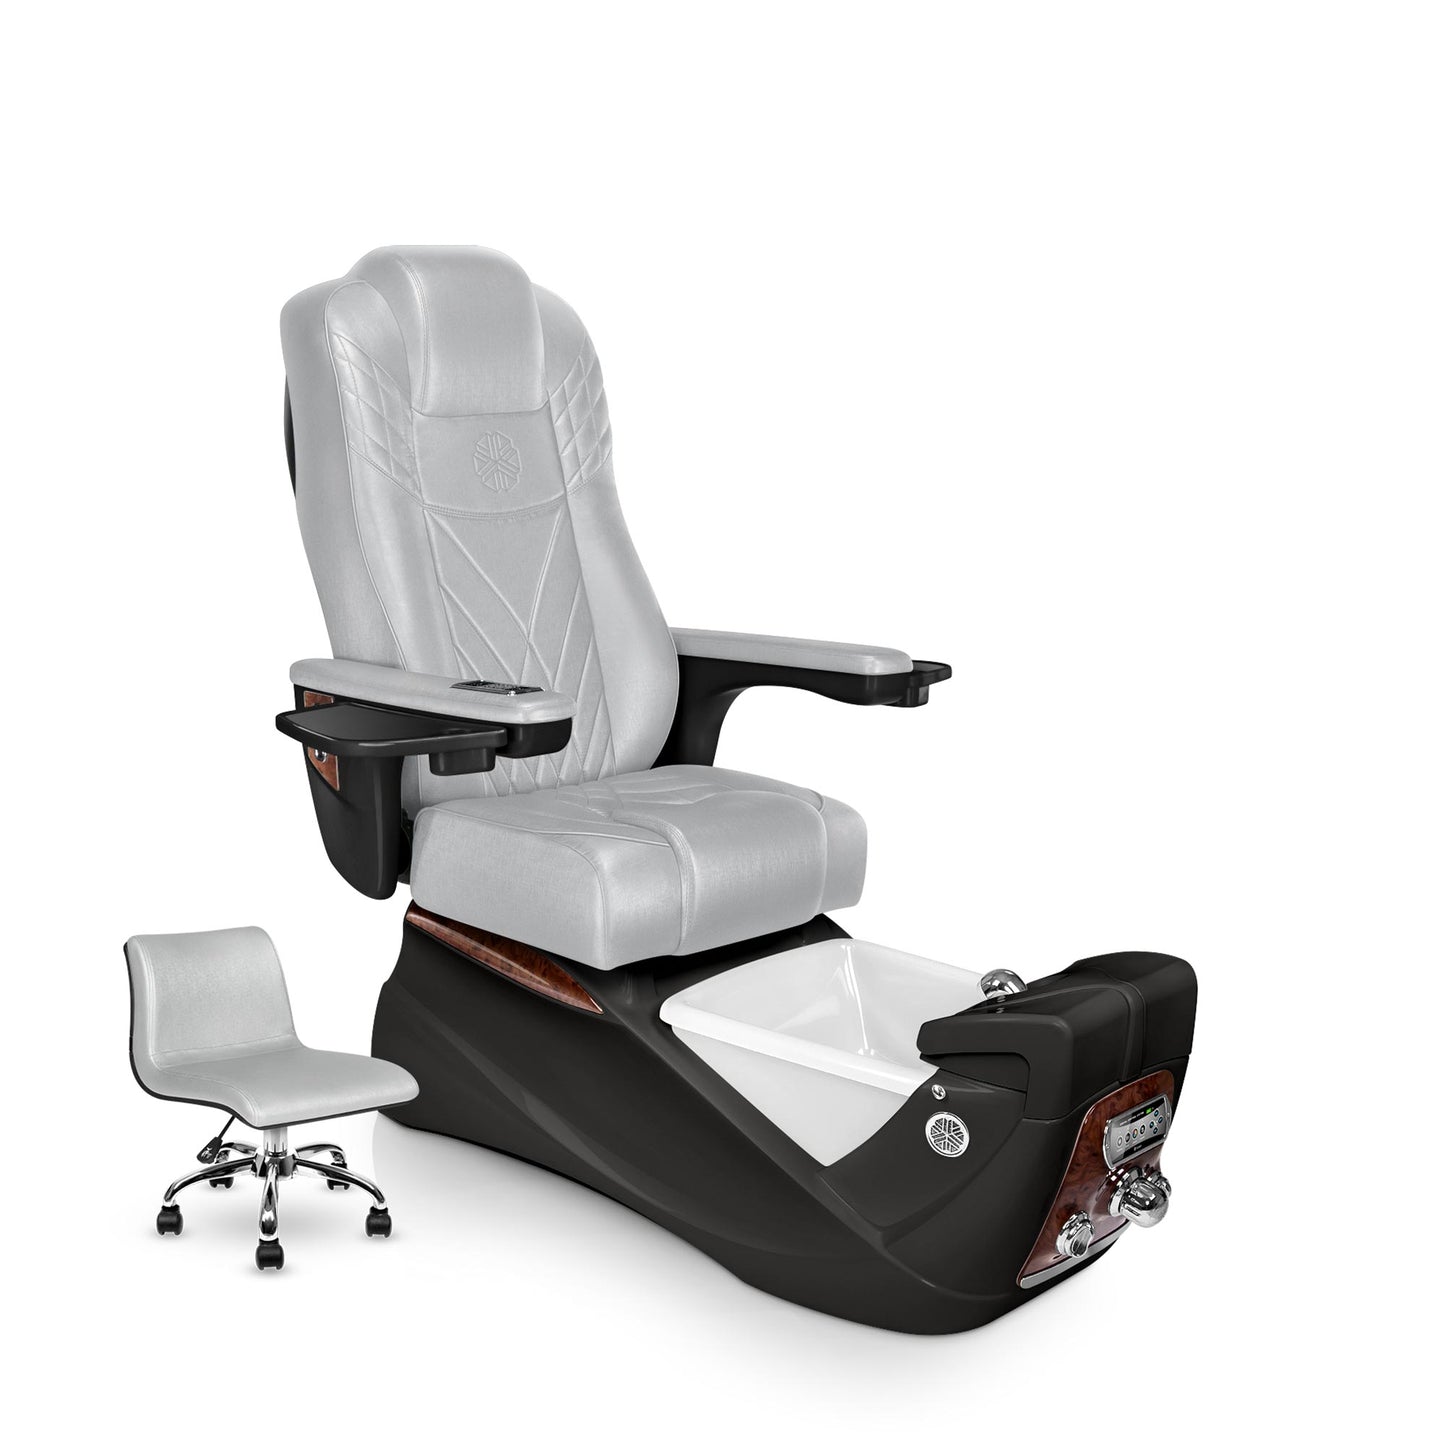 Lexor INFINITY pedicure chair with platinum cushion and espresso spa base